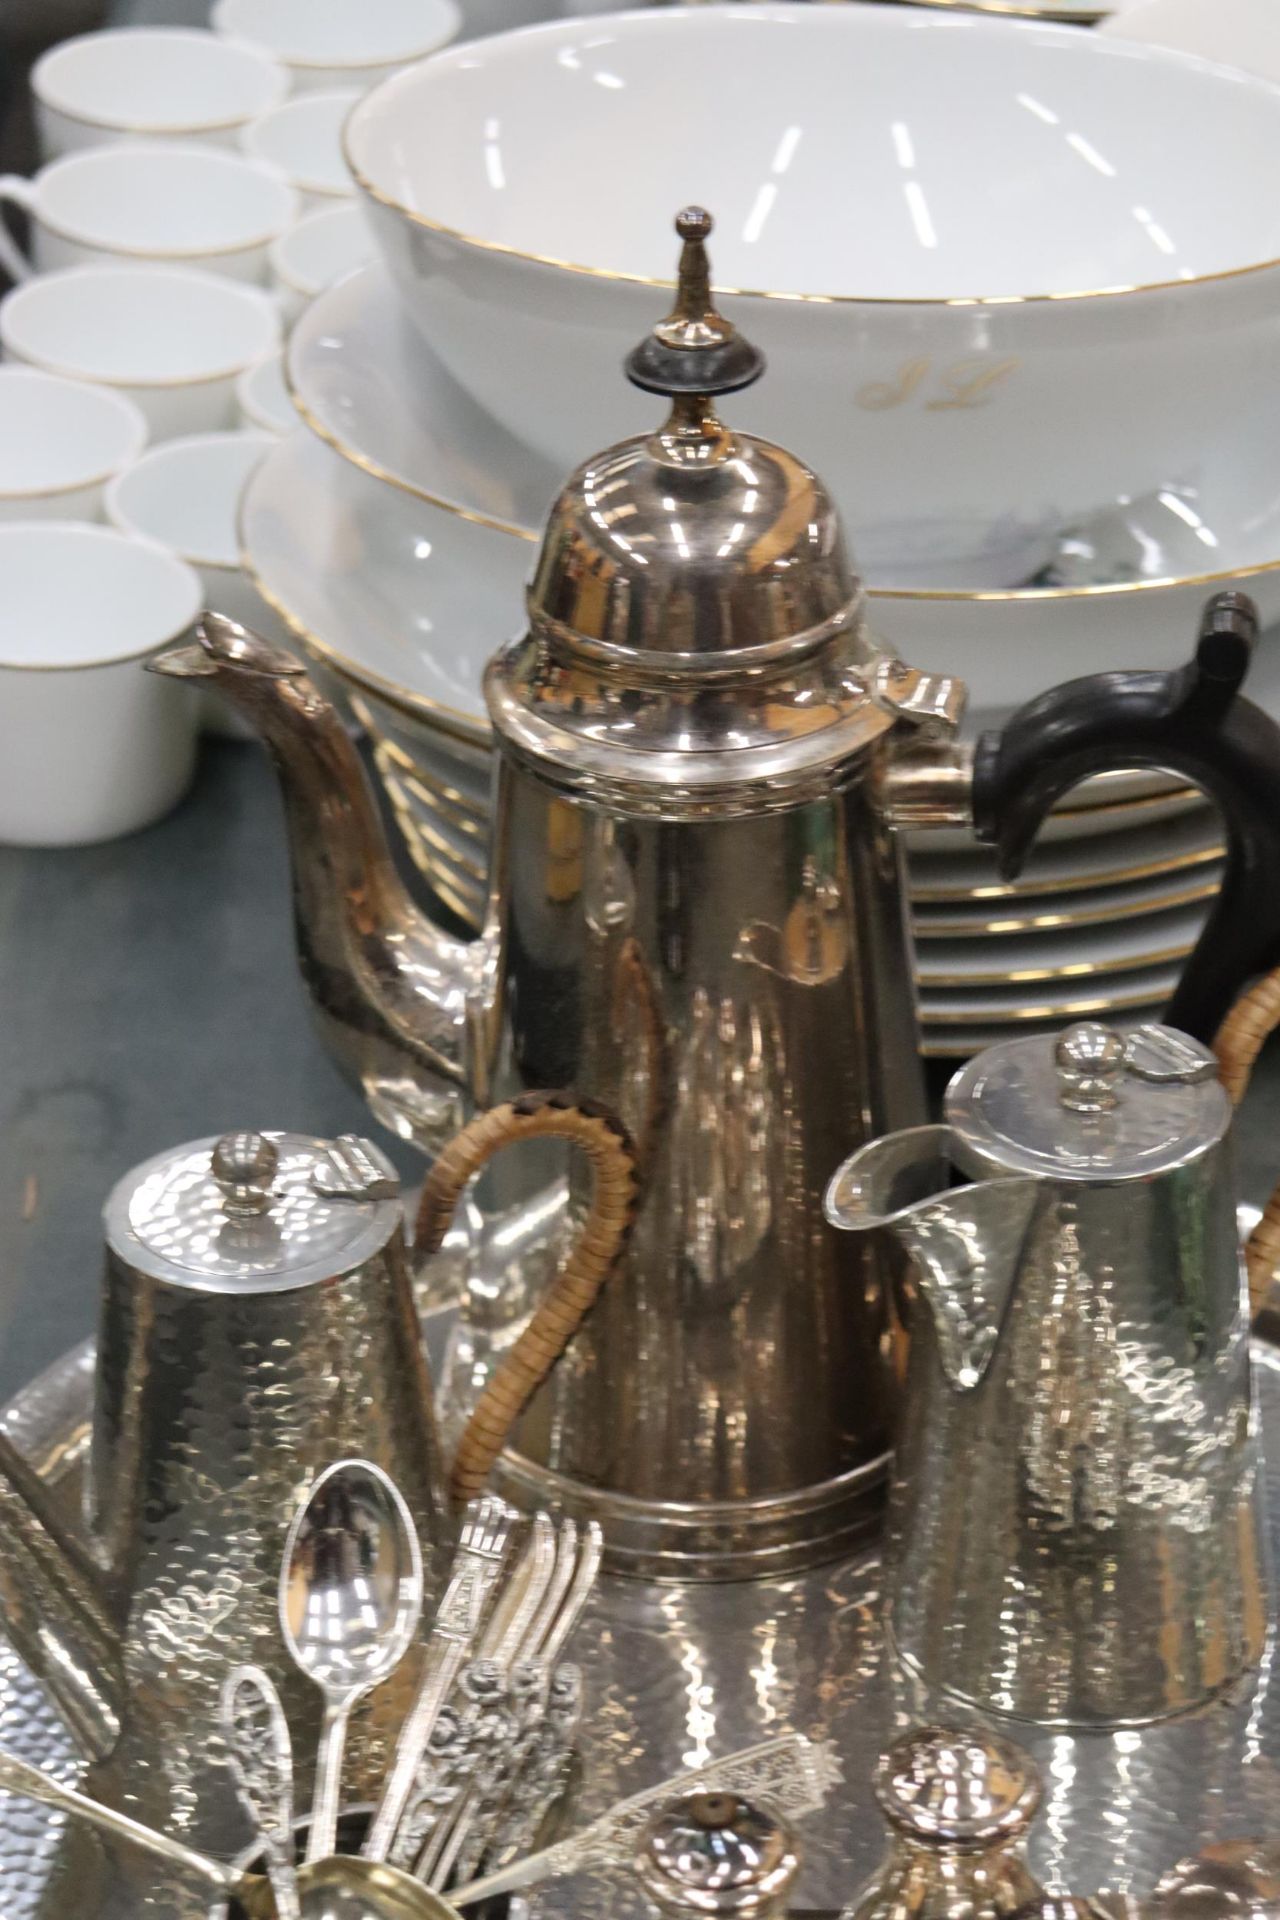 A PEWTER TRAY, COFFEE POT AND HOT WATER JUG, PLUS A SILVER PLATED COFFEE POT, CRUET SET, MUSTARD - Image 3 of 9